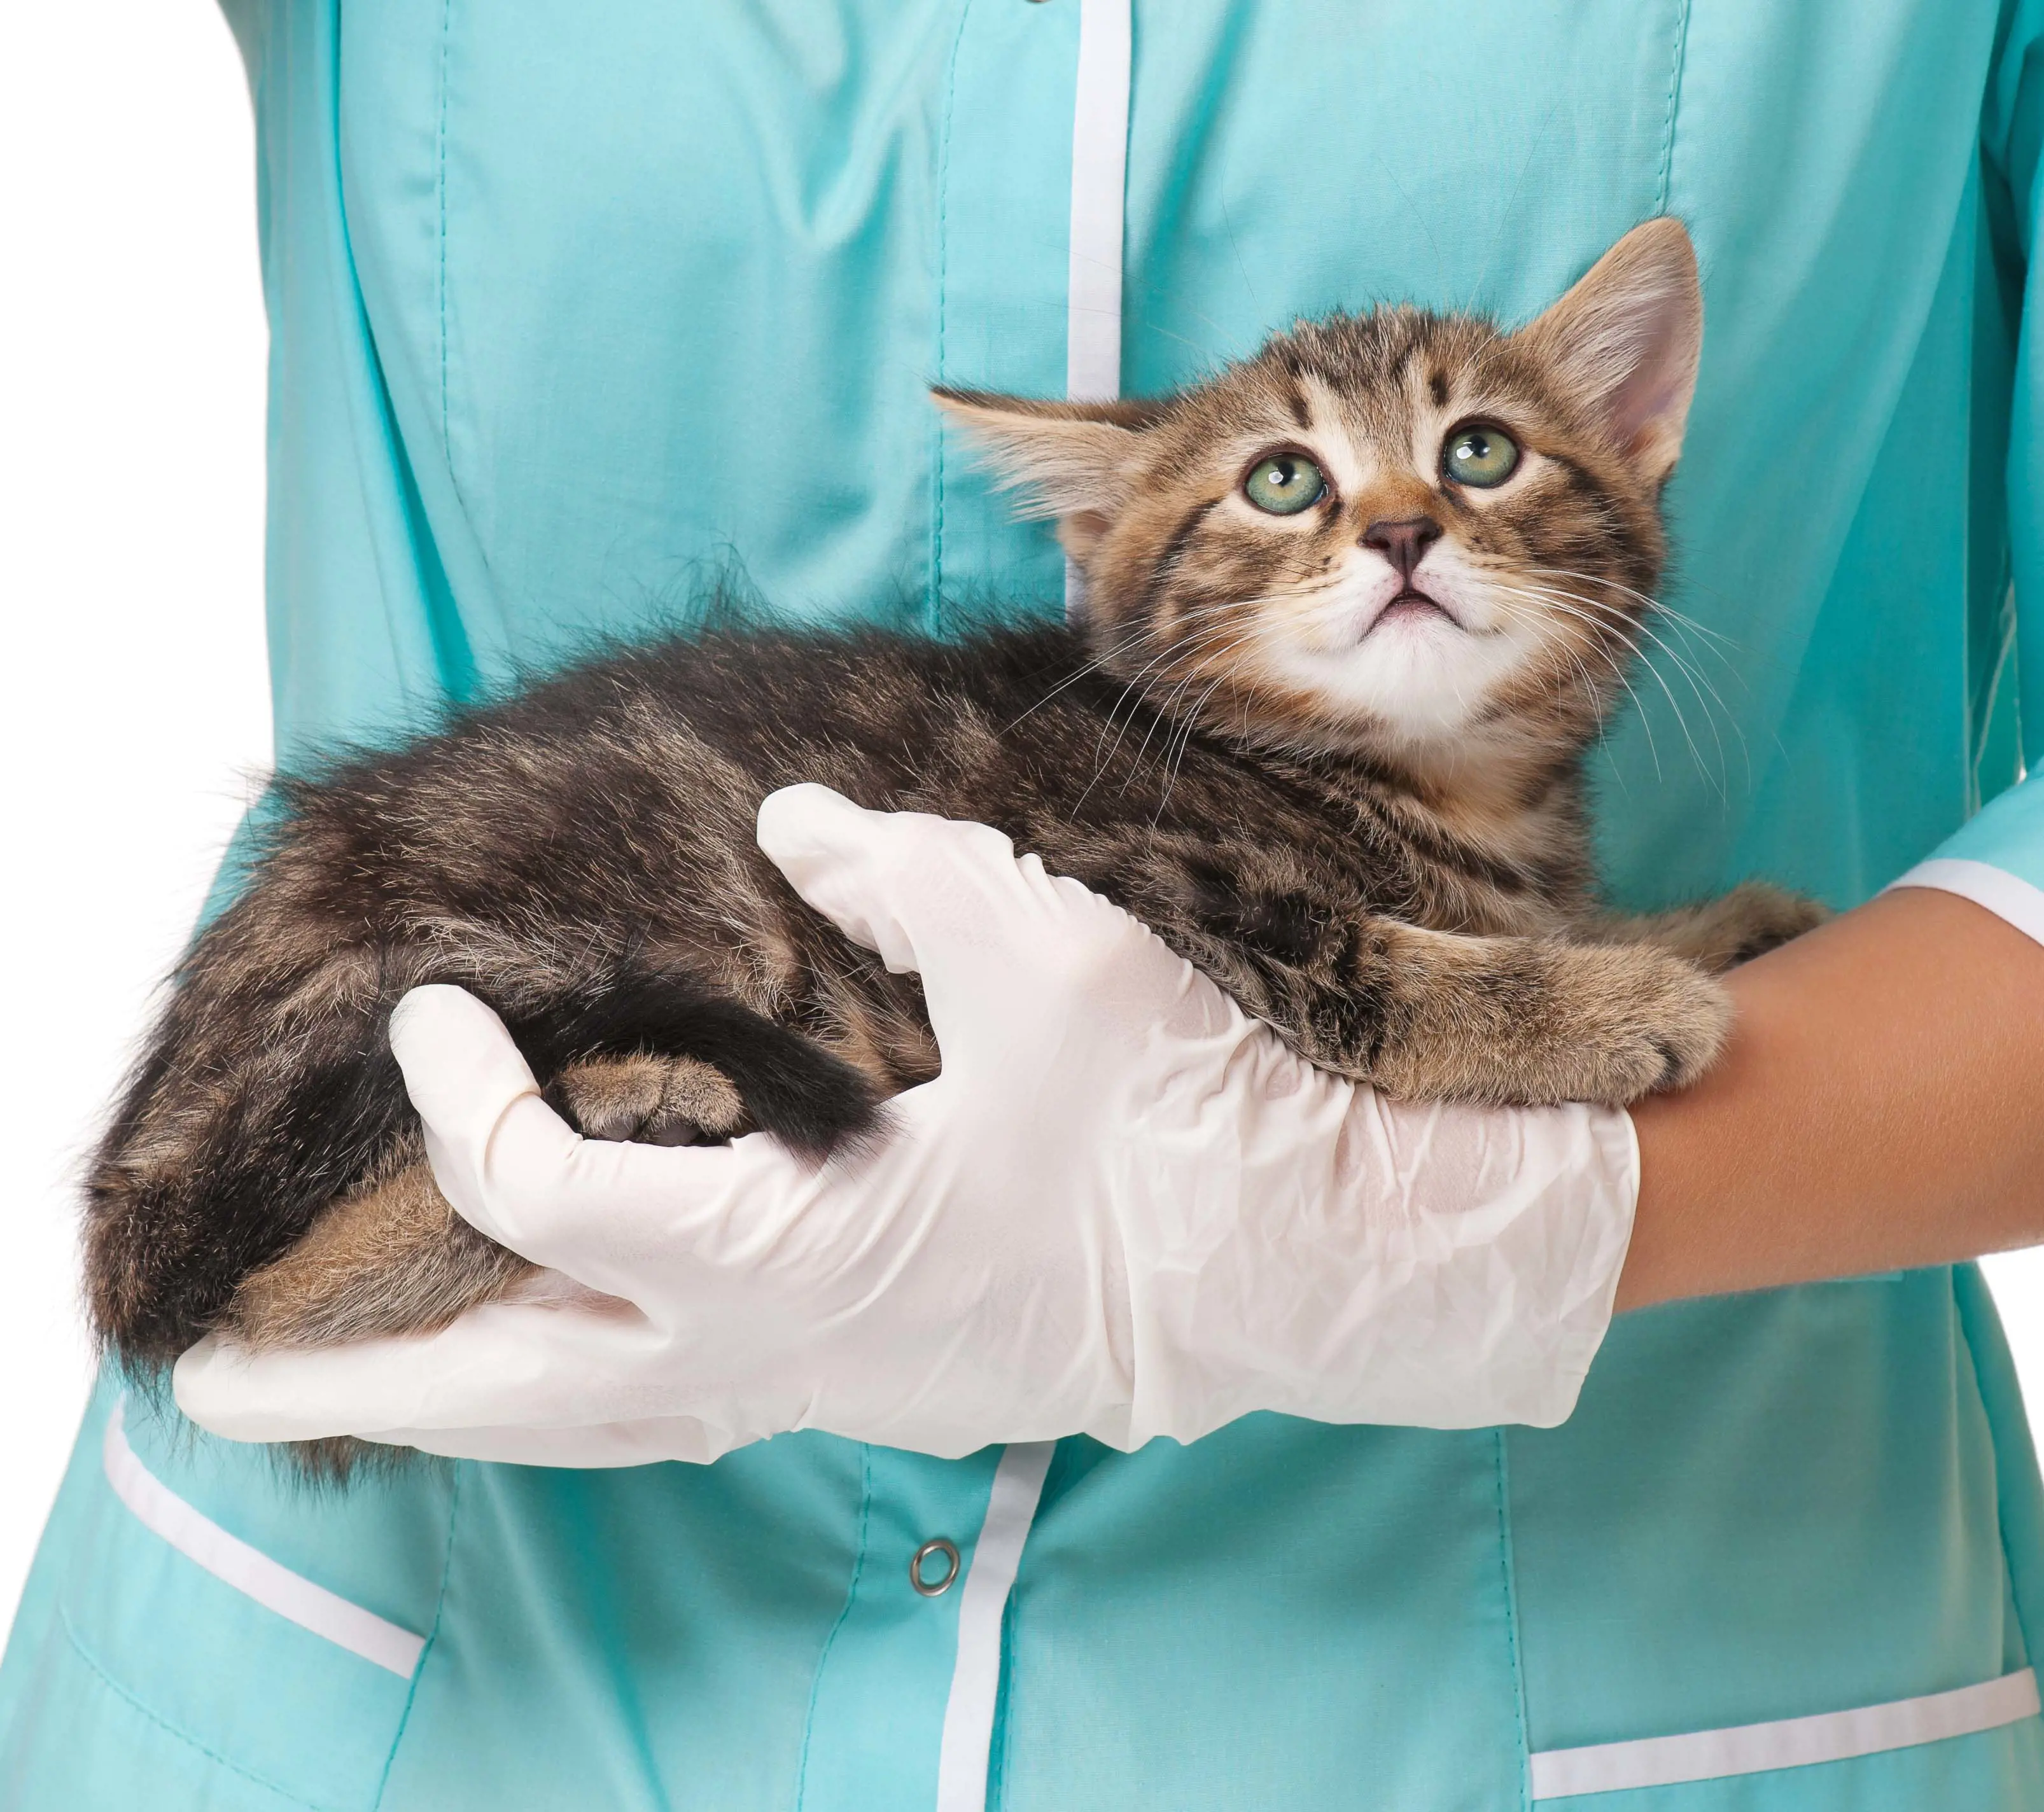 A vet with gloves on holding a kitten in their arms